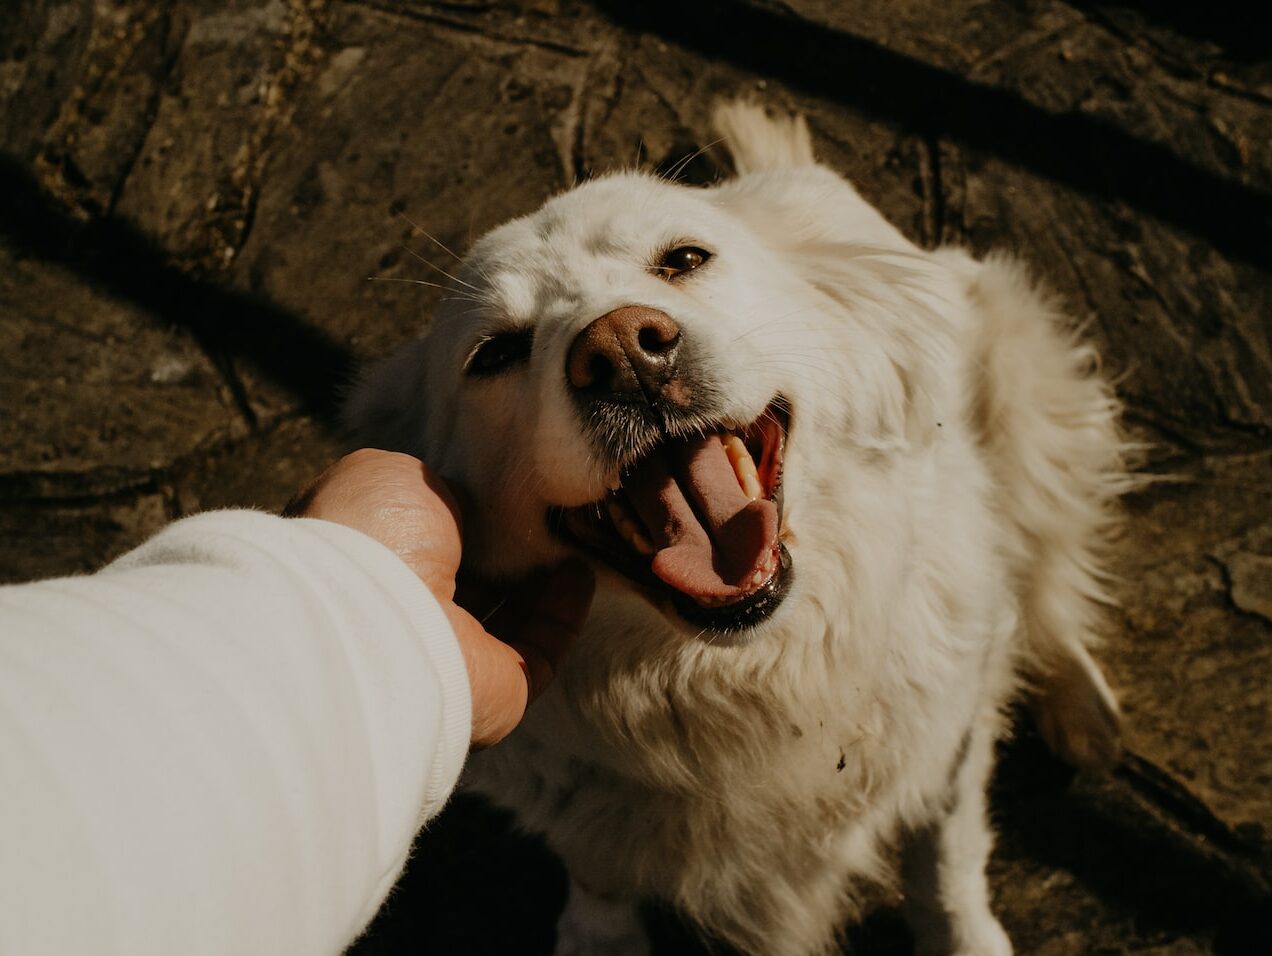 a white dog is being petted by a person